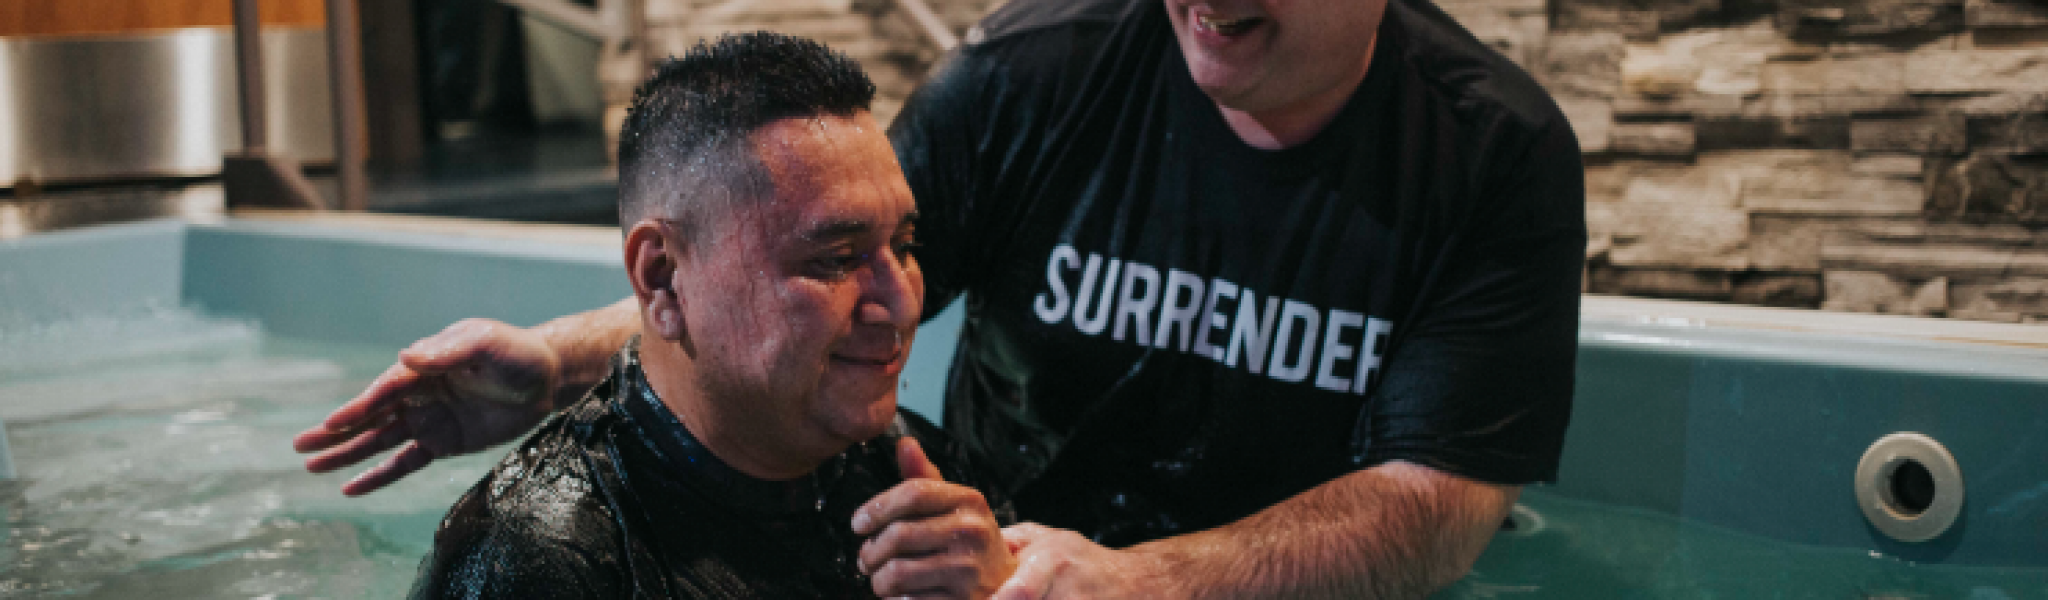 It was such an amazing weekend as we had the privilege to celebrate with 49 people as they surrendered their life to Christ through baptism. Here is a little recap of the weekend. 